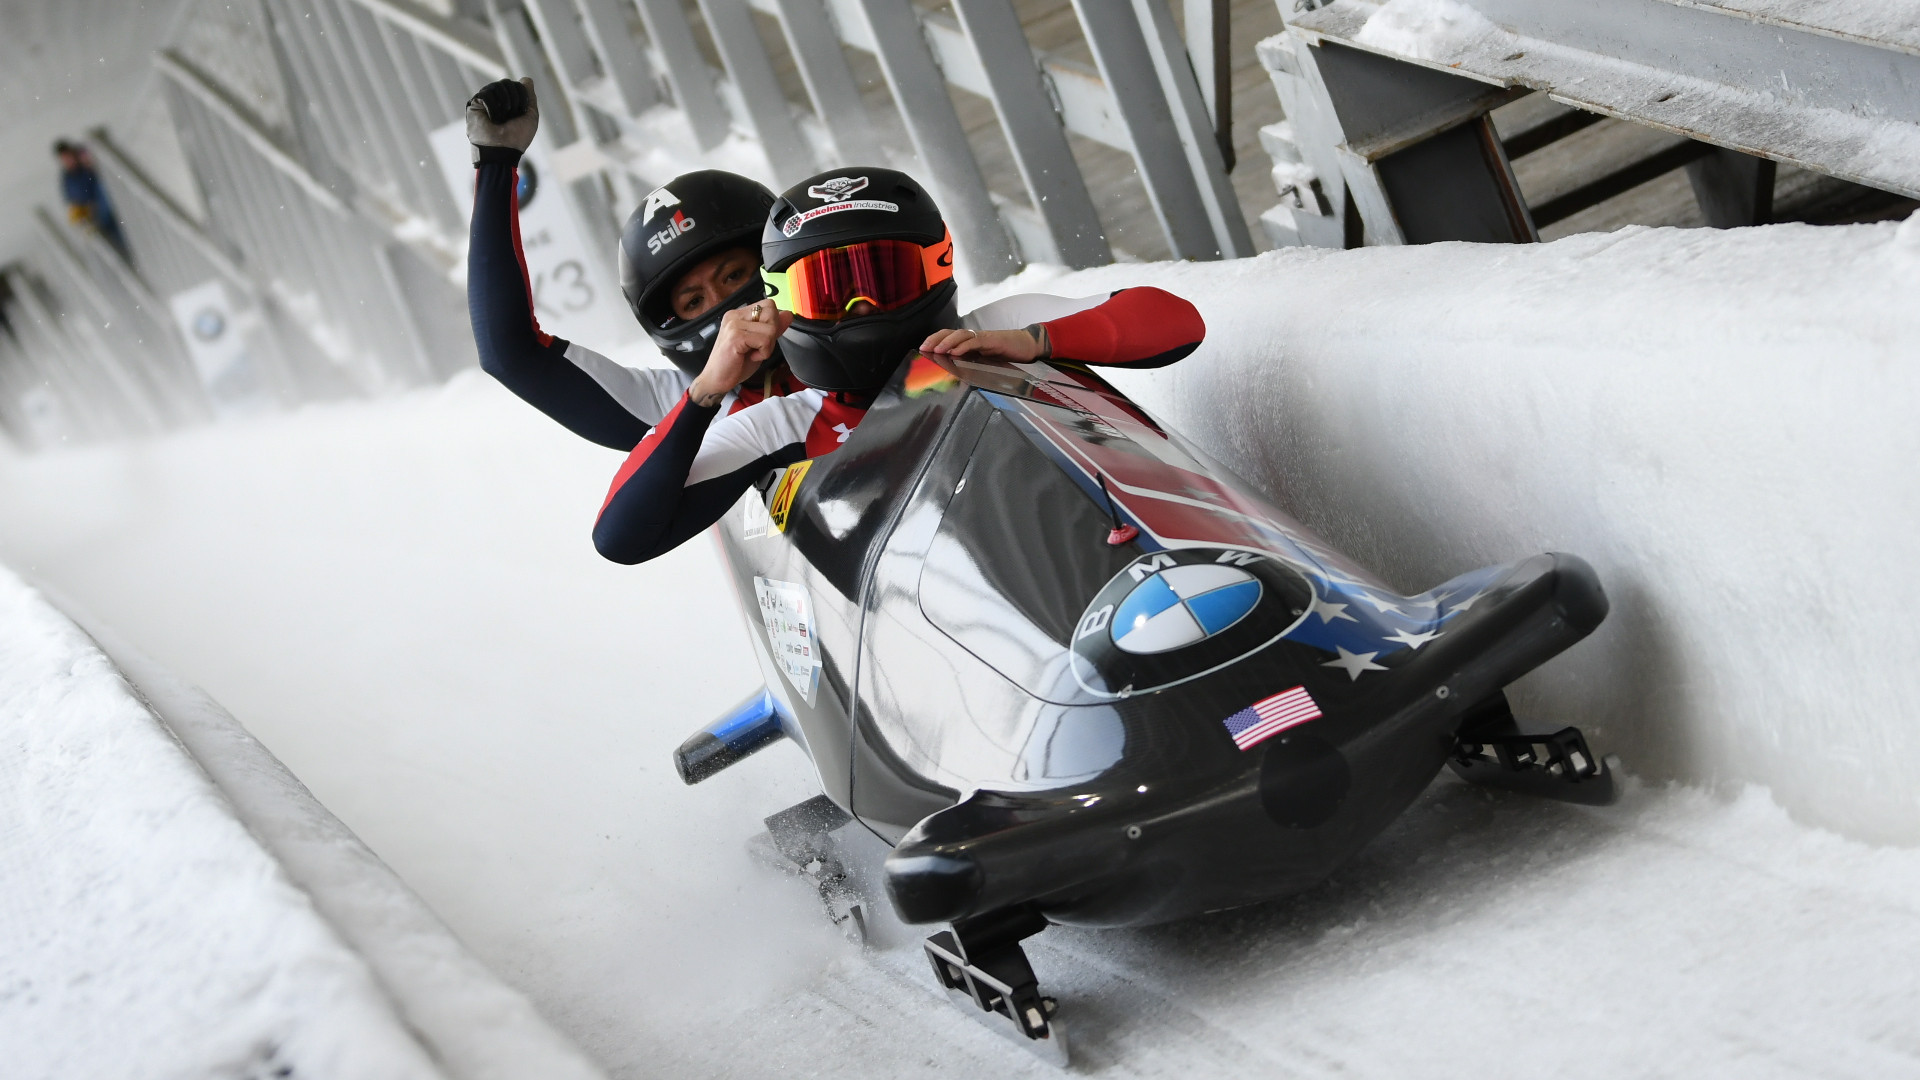 Humphries earns first win for United States in IBSF World Cup opener at Lake Placid